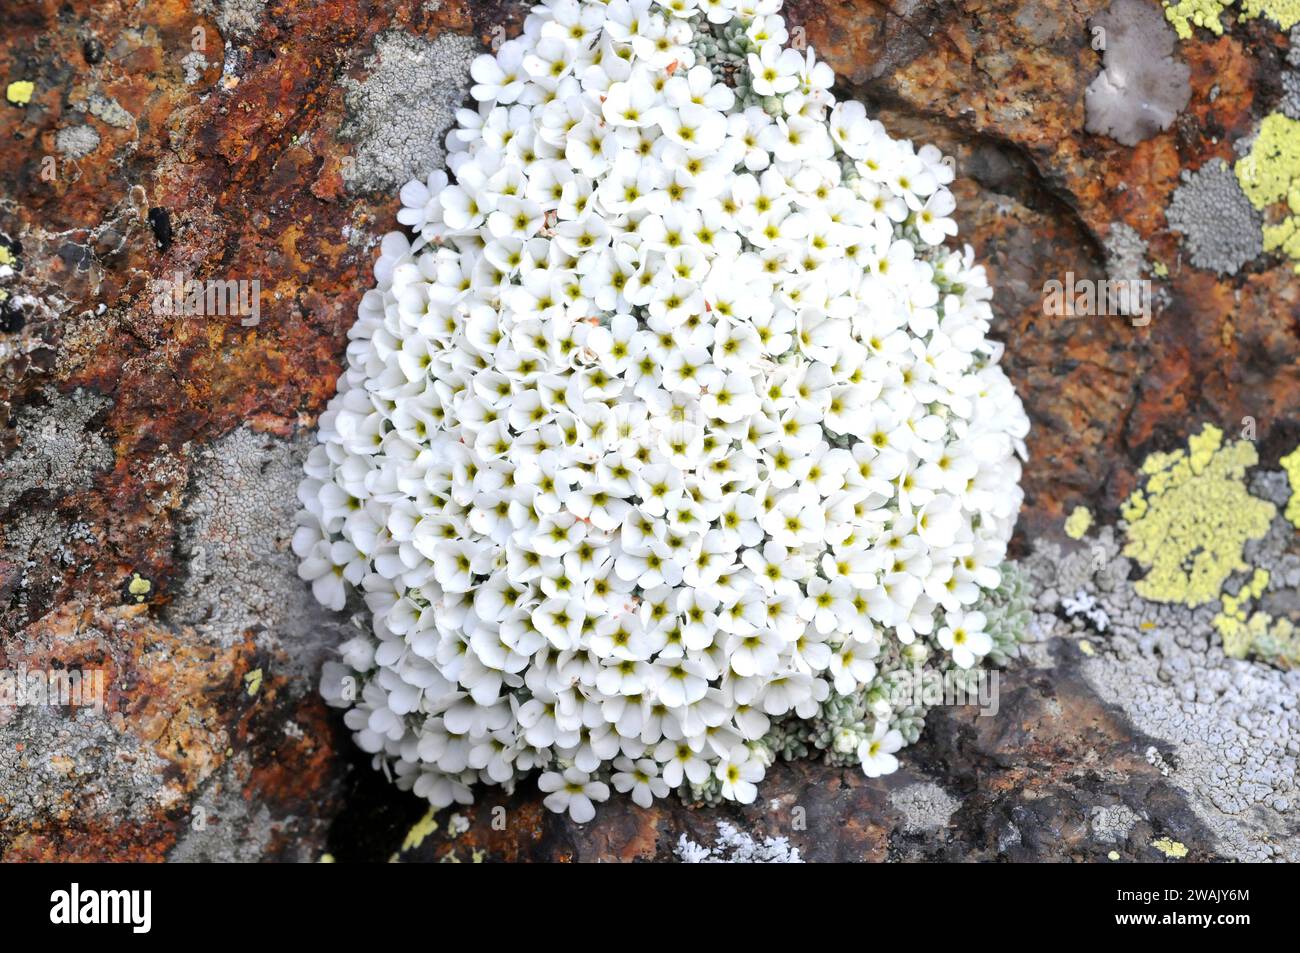 Androsace vandellii is a perennial cushion-forming herb native to Pyrenees, Sierra Nevada, Alps, Apennines and Atlas Mountains. This photo was taken i Stock Photo